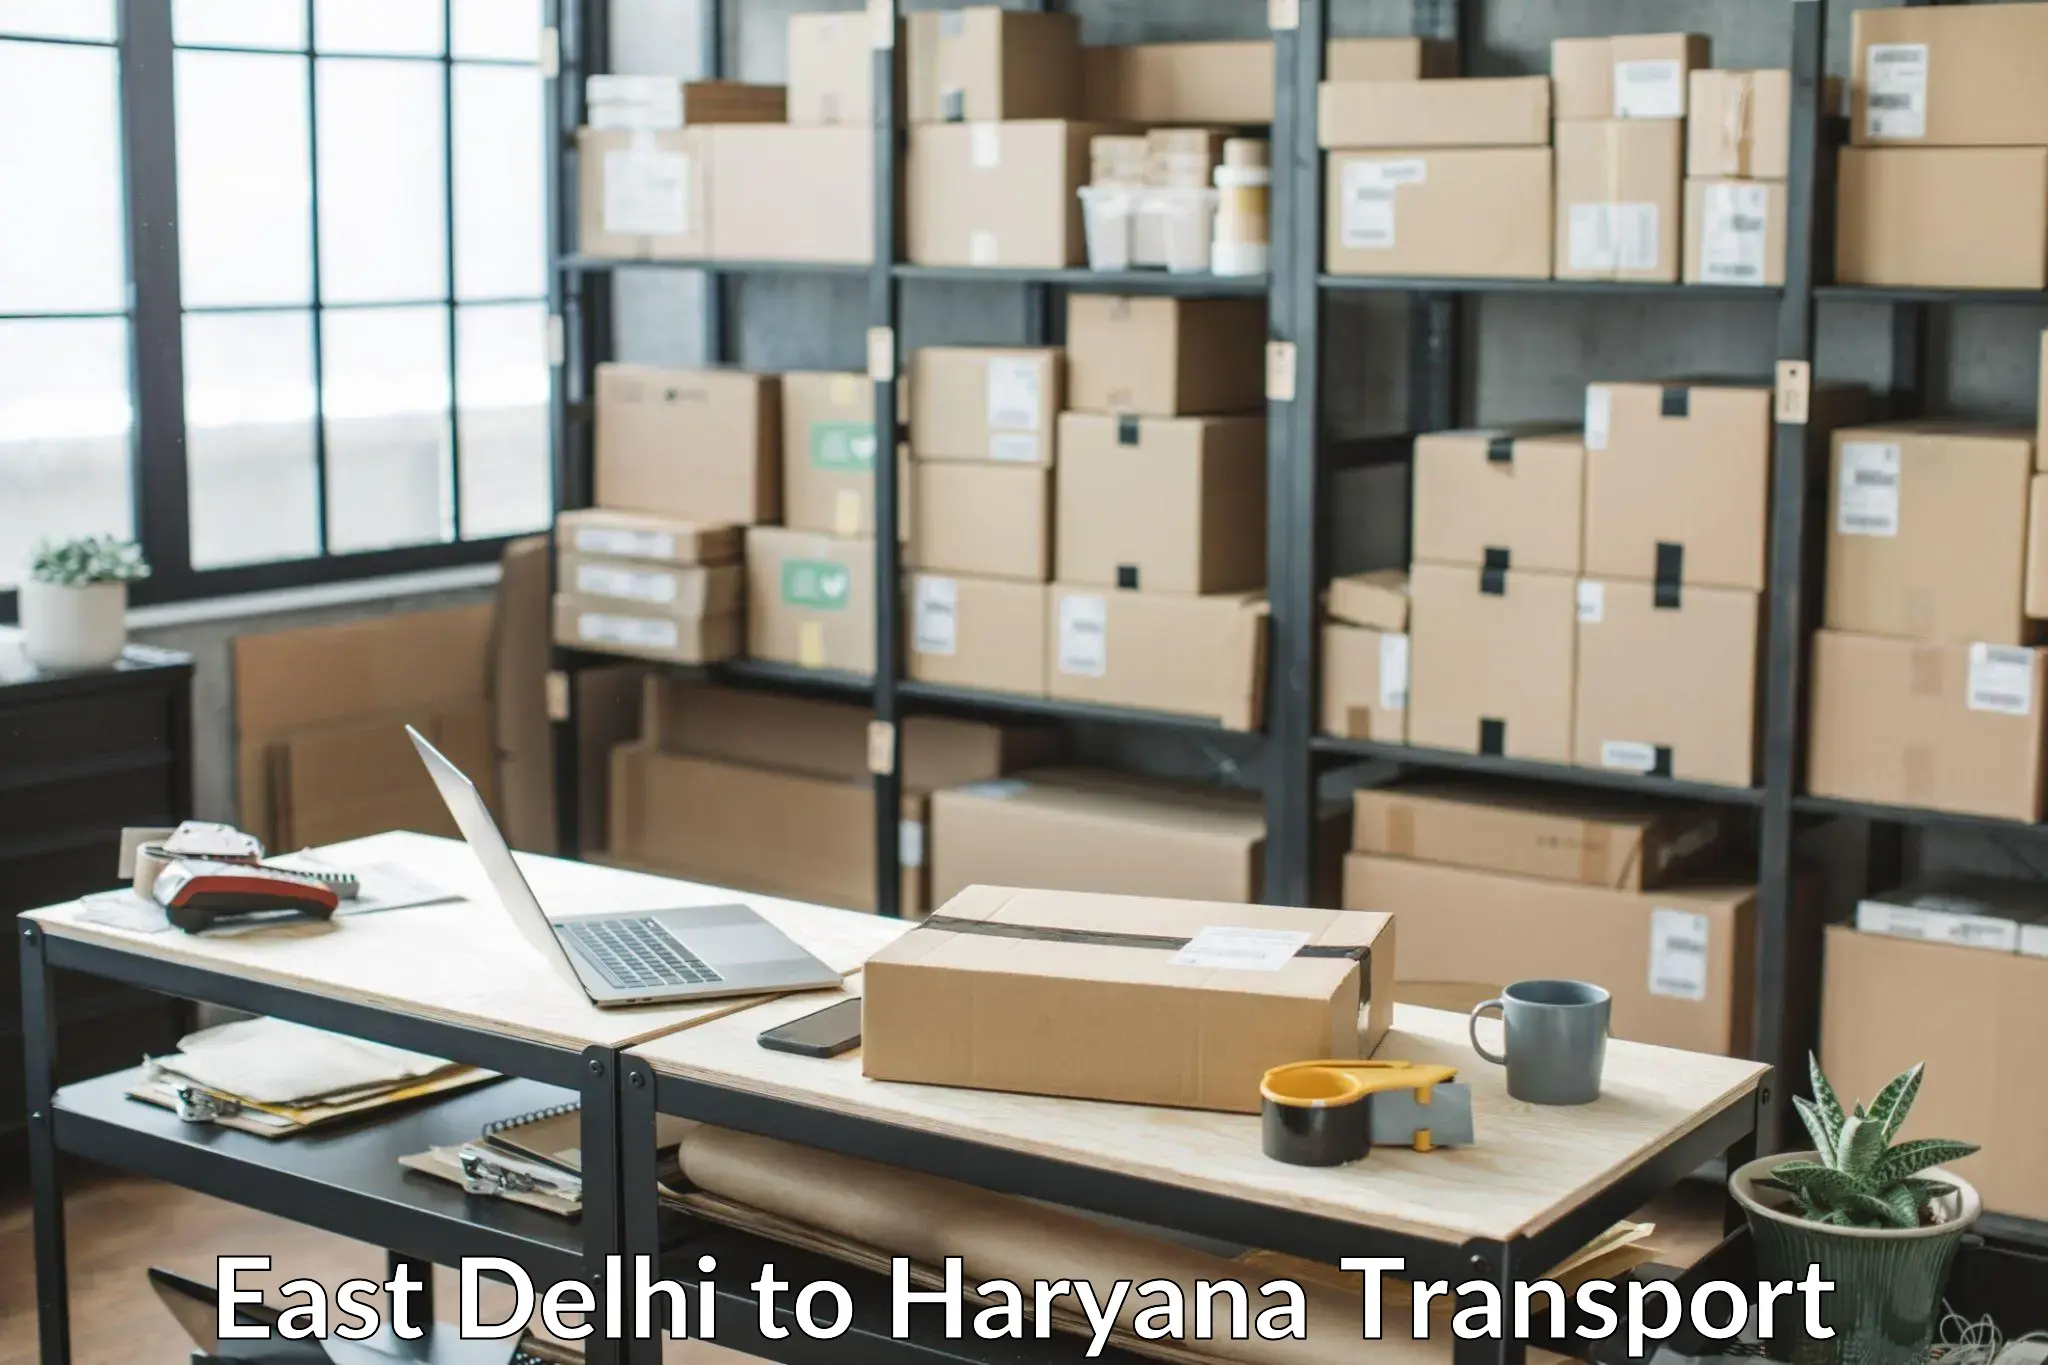 Container transport service East Delhi to Jhajjar